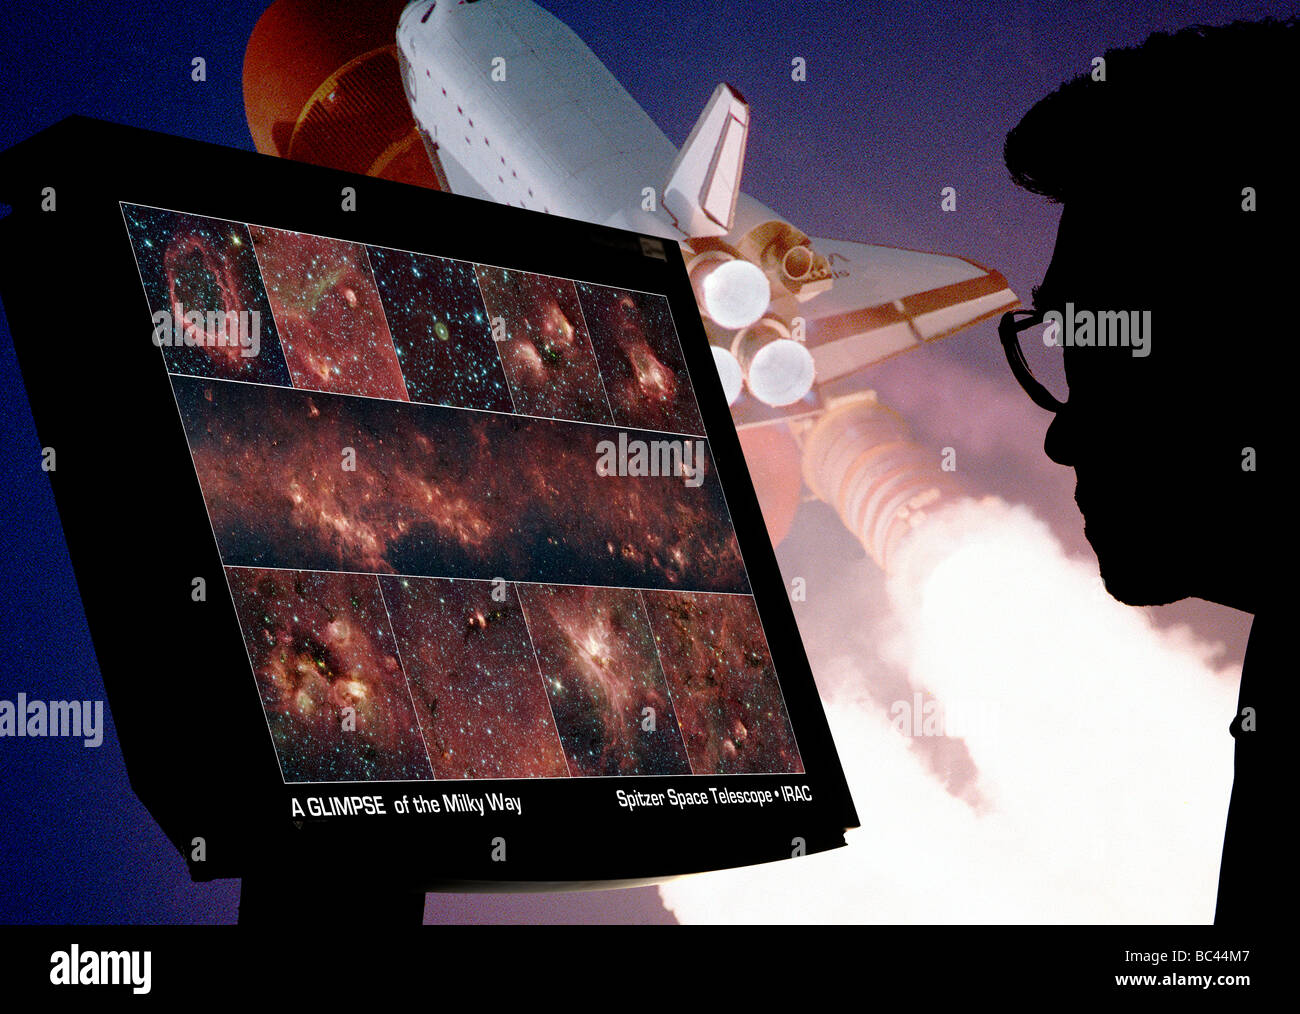 astronomy student studying galaxies on computer with NASA shuttle projection in background Stock Photo